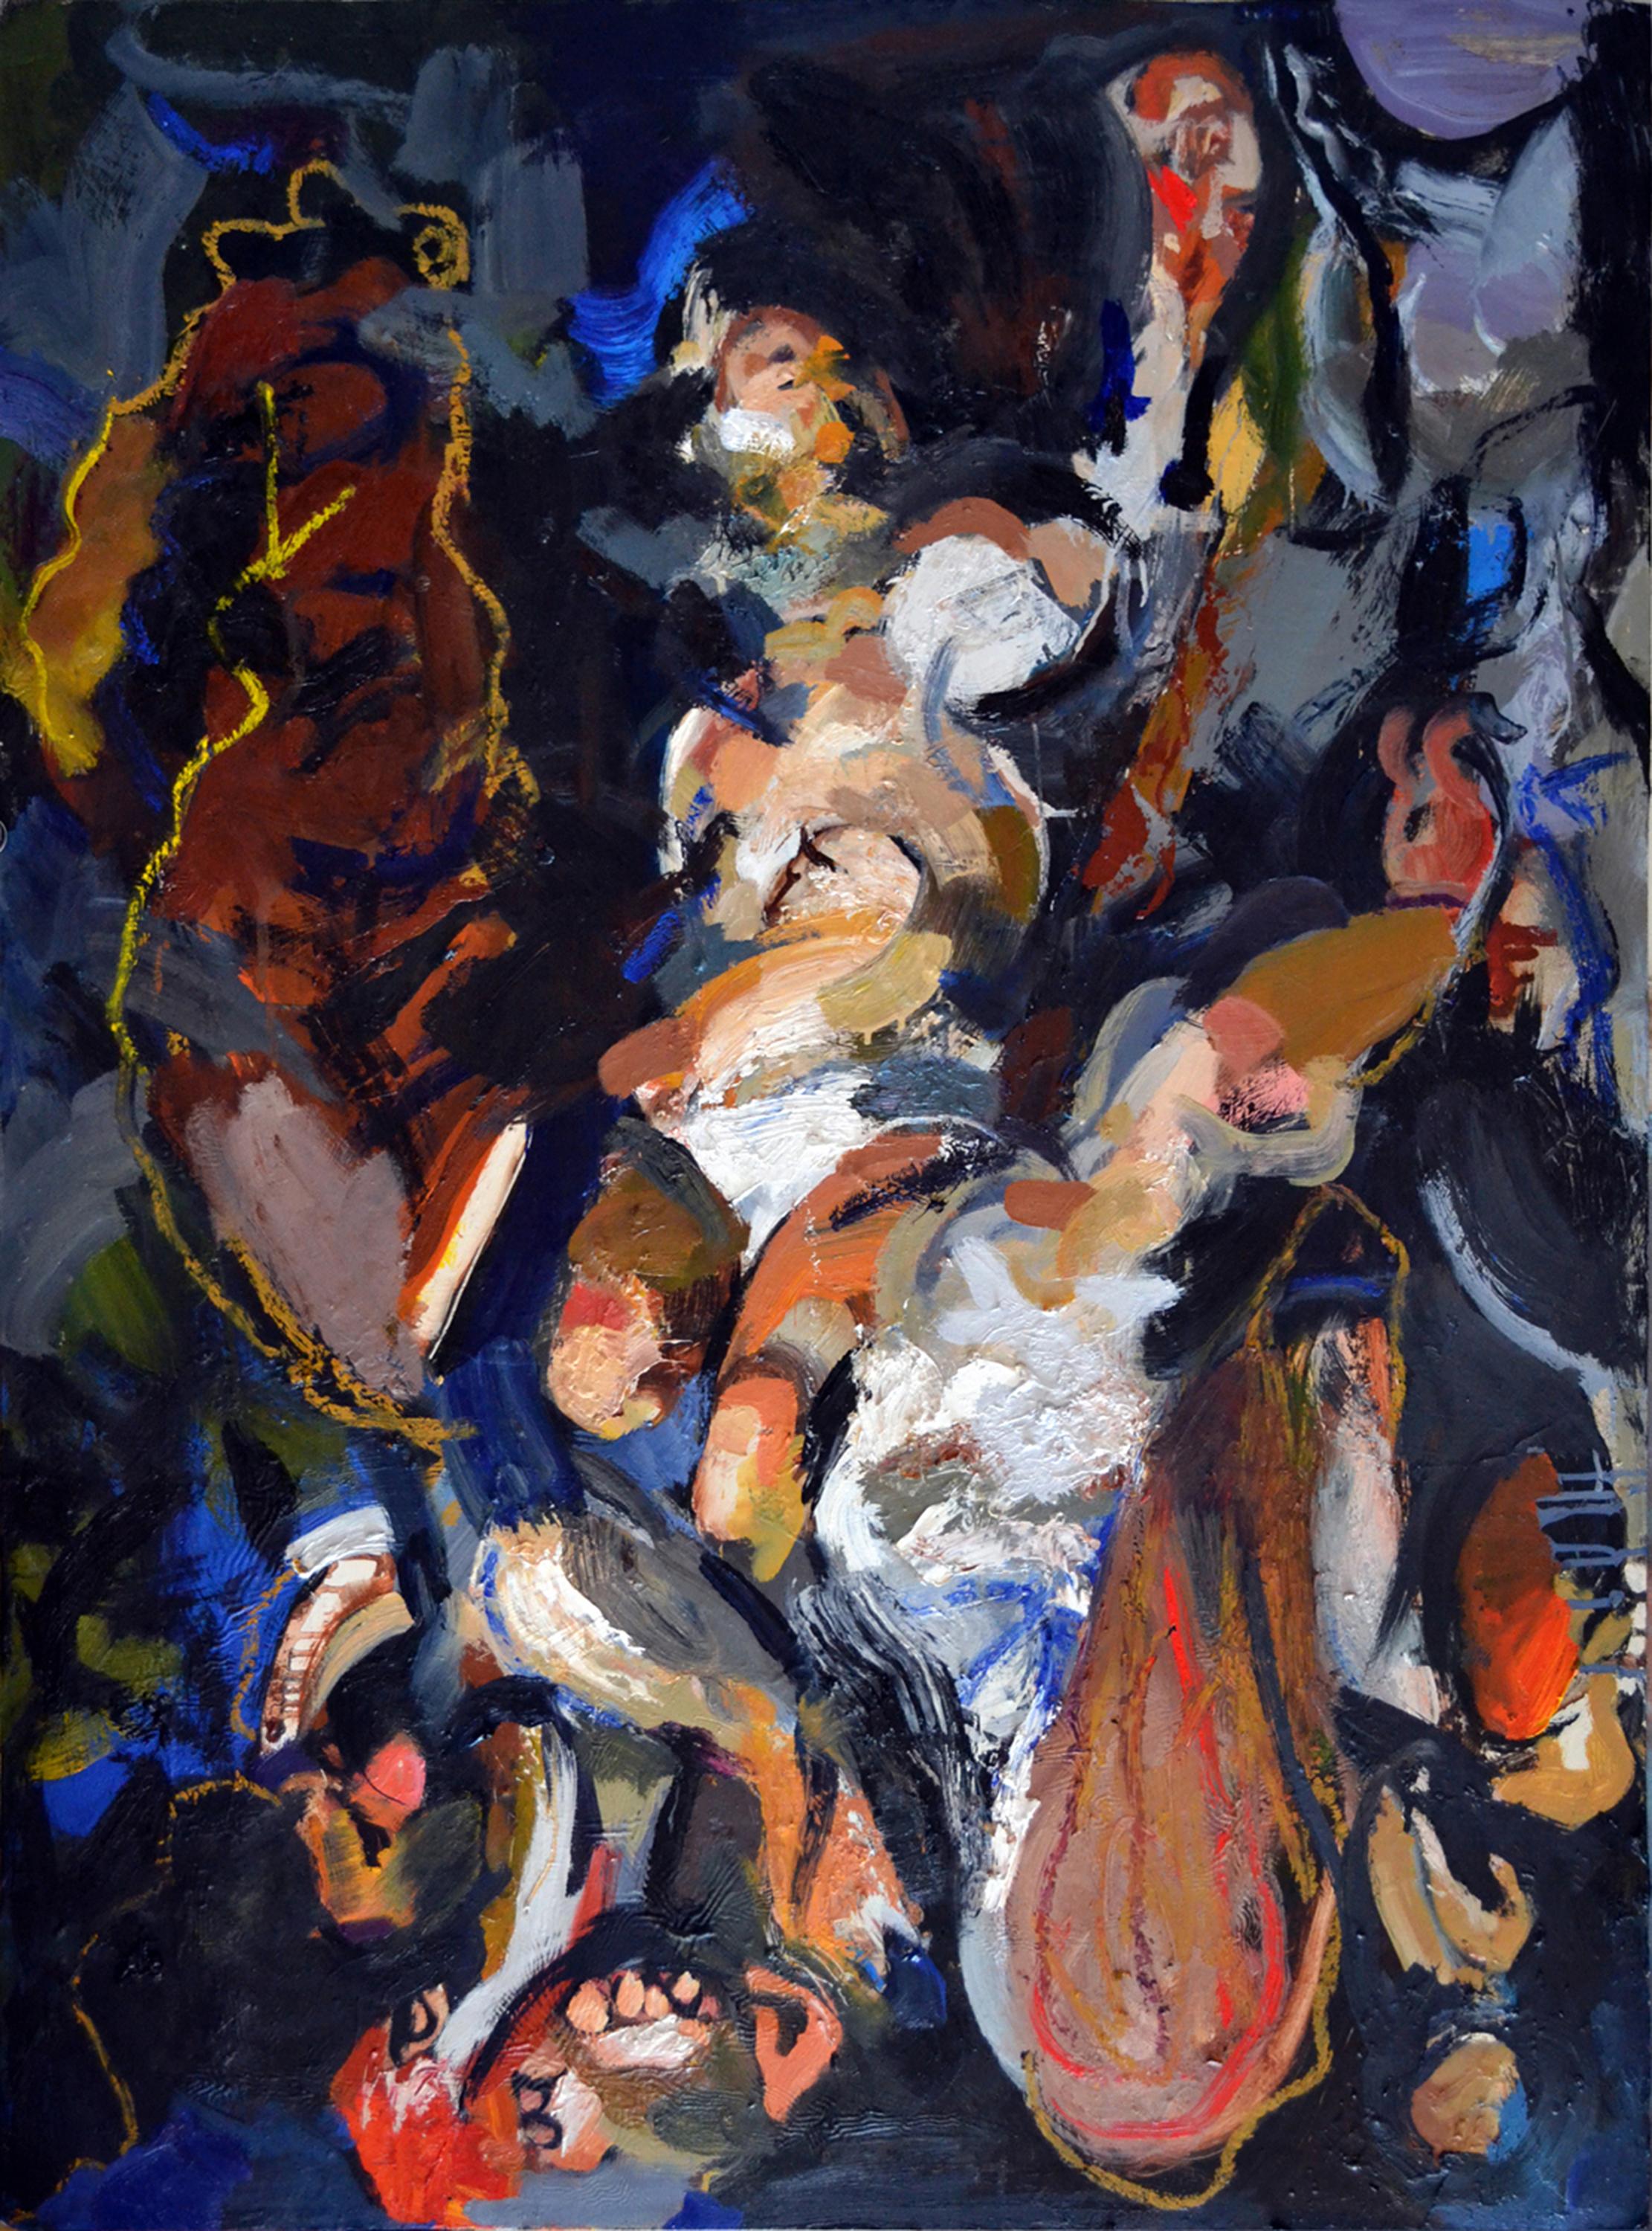 Tom Bennett Figurative Painting - "Pete's Going Away, " colorful gestural abstraction, multiple figures